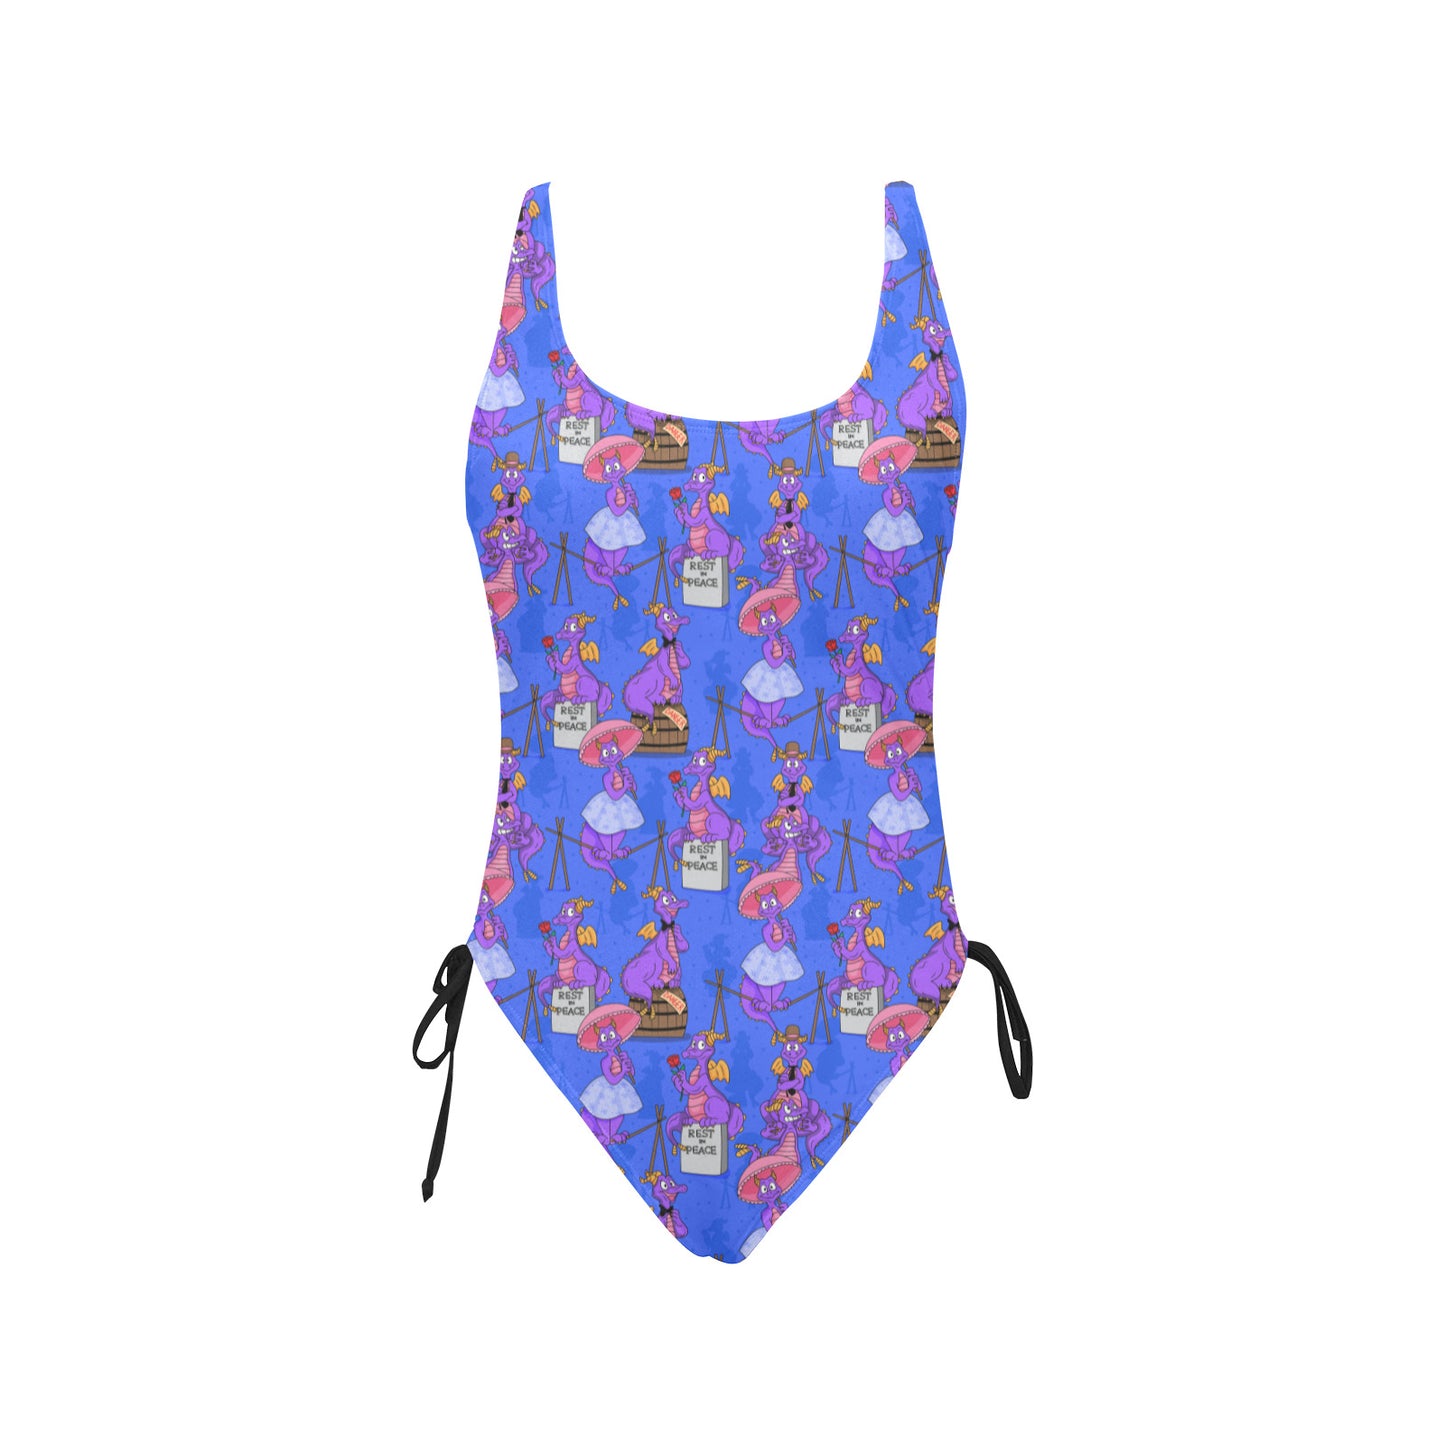 Haunted Mansion Figment Drawstring Side Women's One-Piece Swimsuit